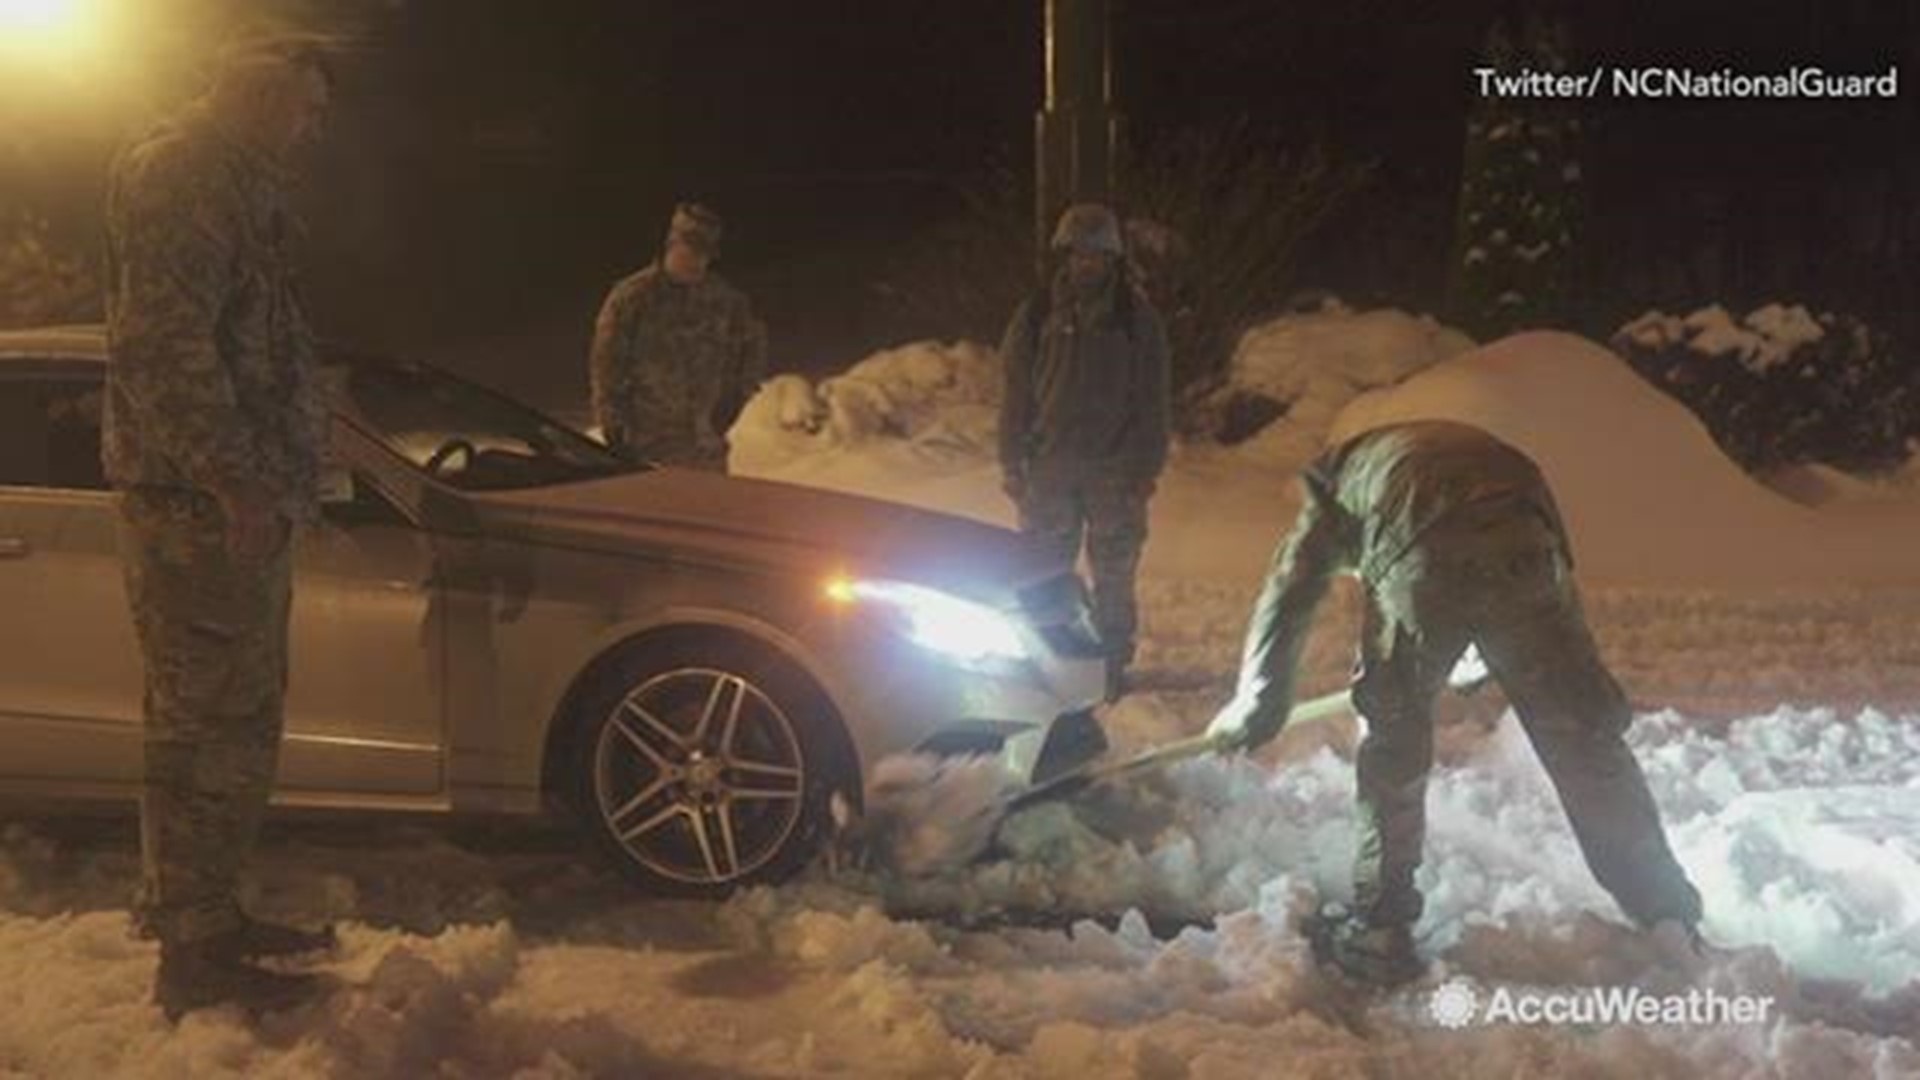 As a snow storm hit North Carolina on December 8 and 9, the North Carolina National Guard was out rescuing people